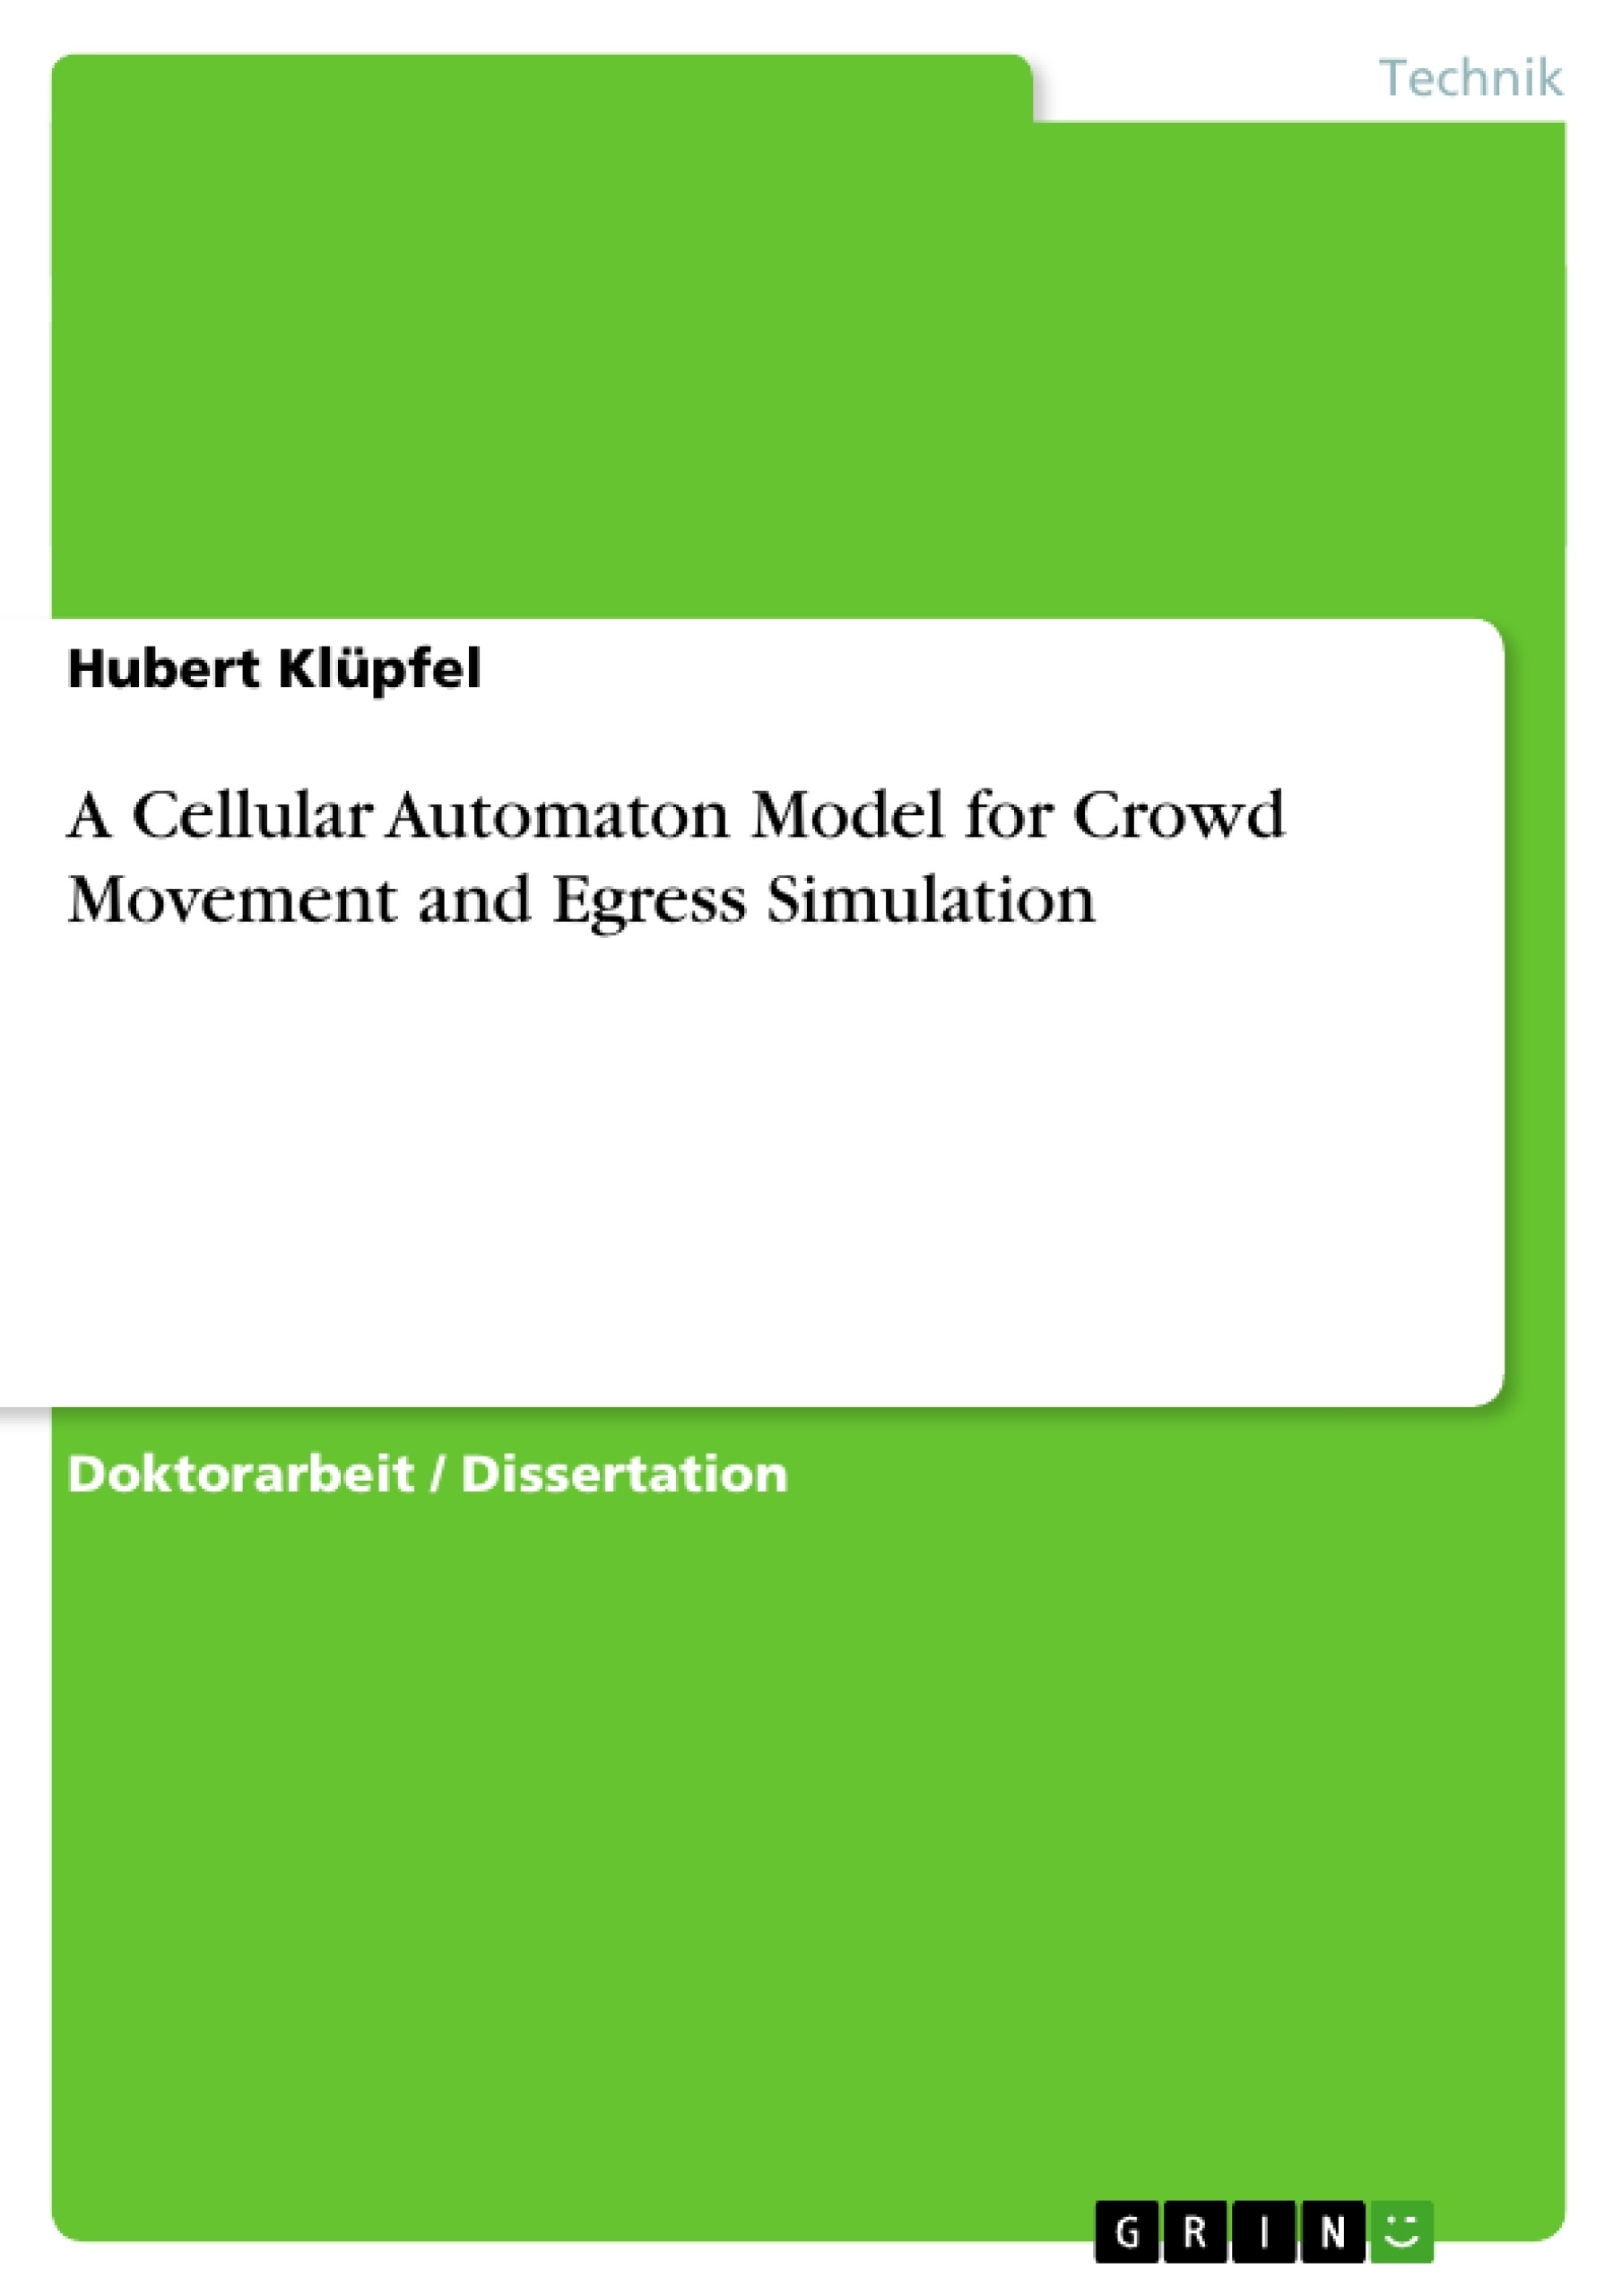 Titel: A Cellular Automaton Model for Crowd Movement and Egress Simulation